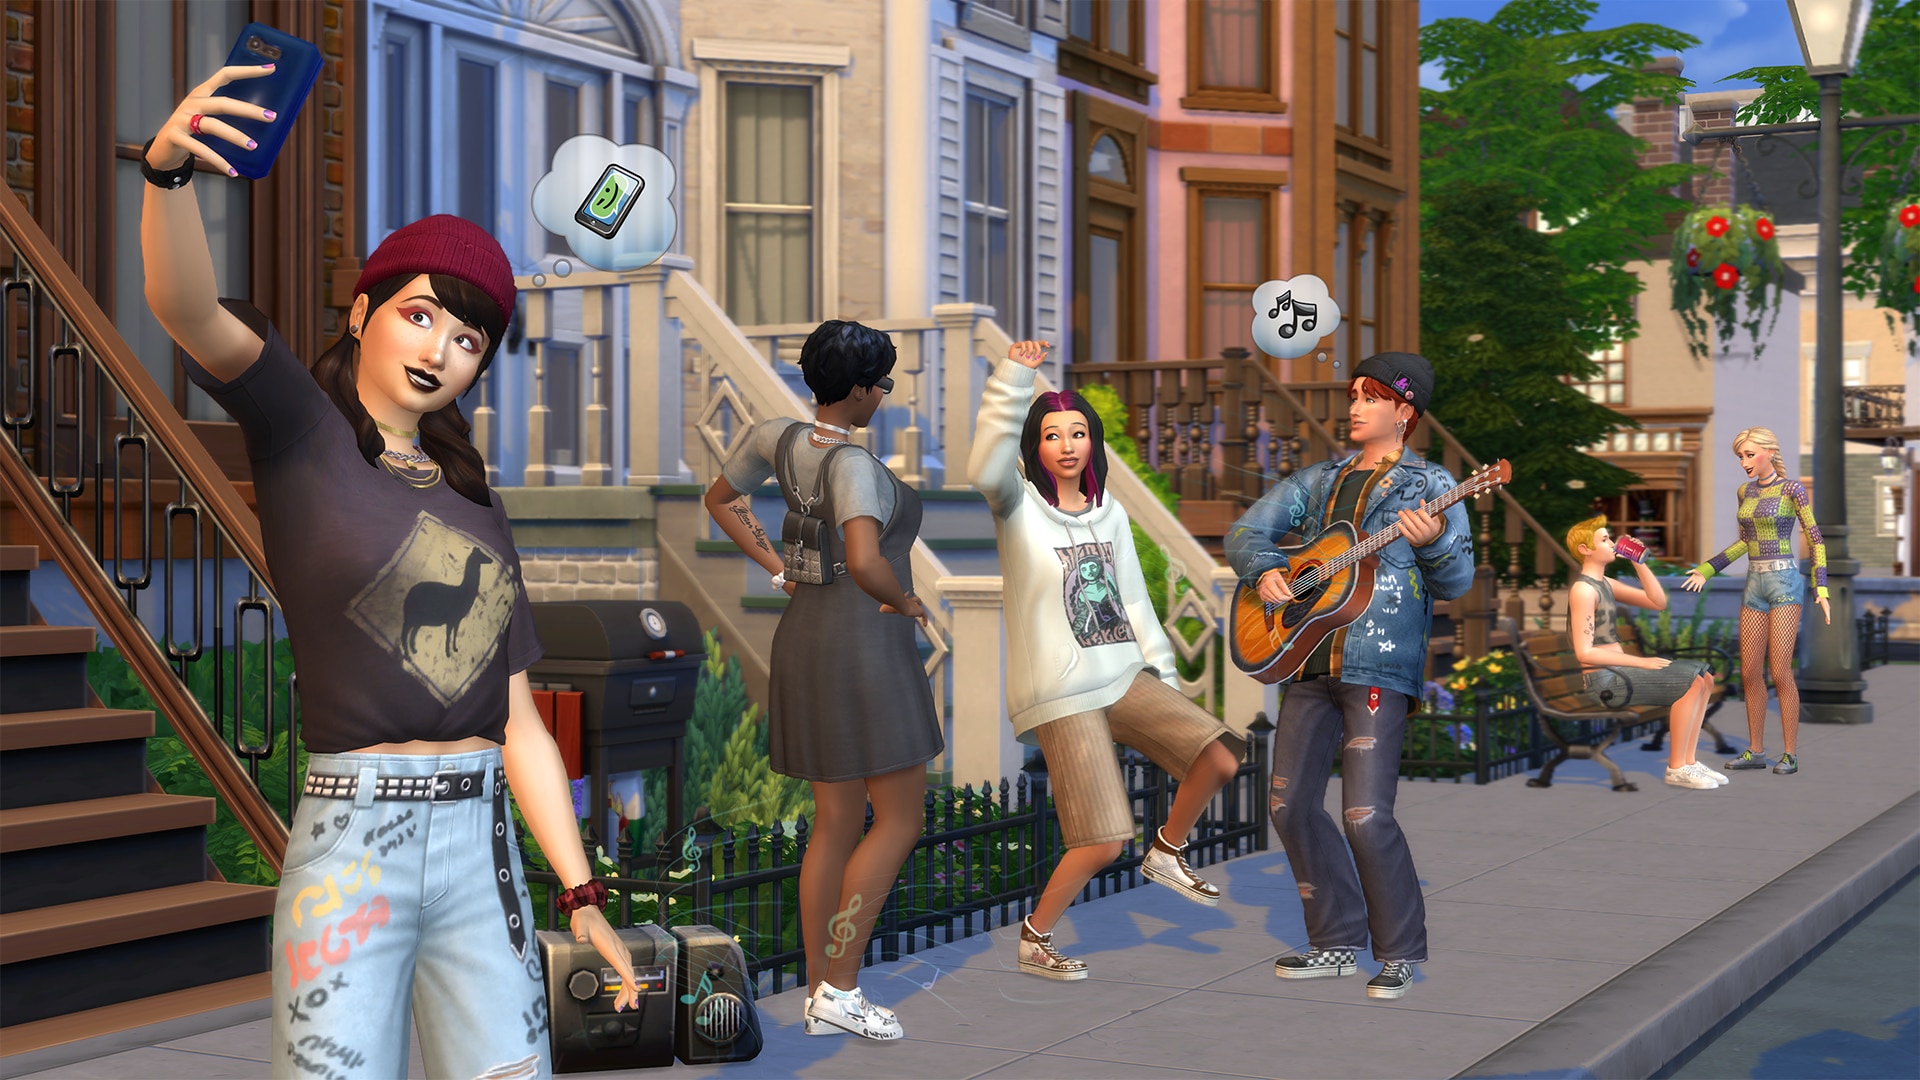 Two New Kits for The Sims 4 Being Released This Thursday (June 1st)